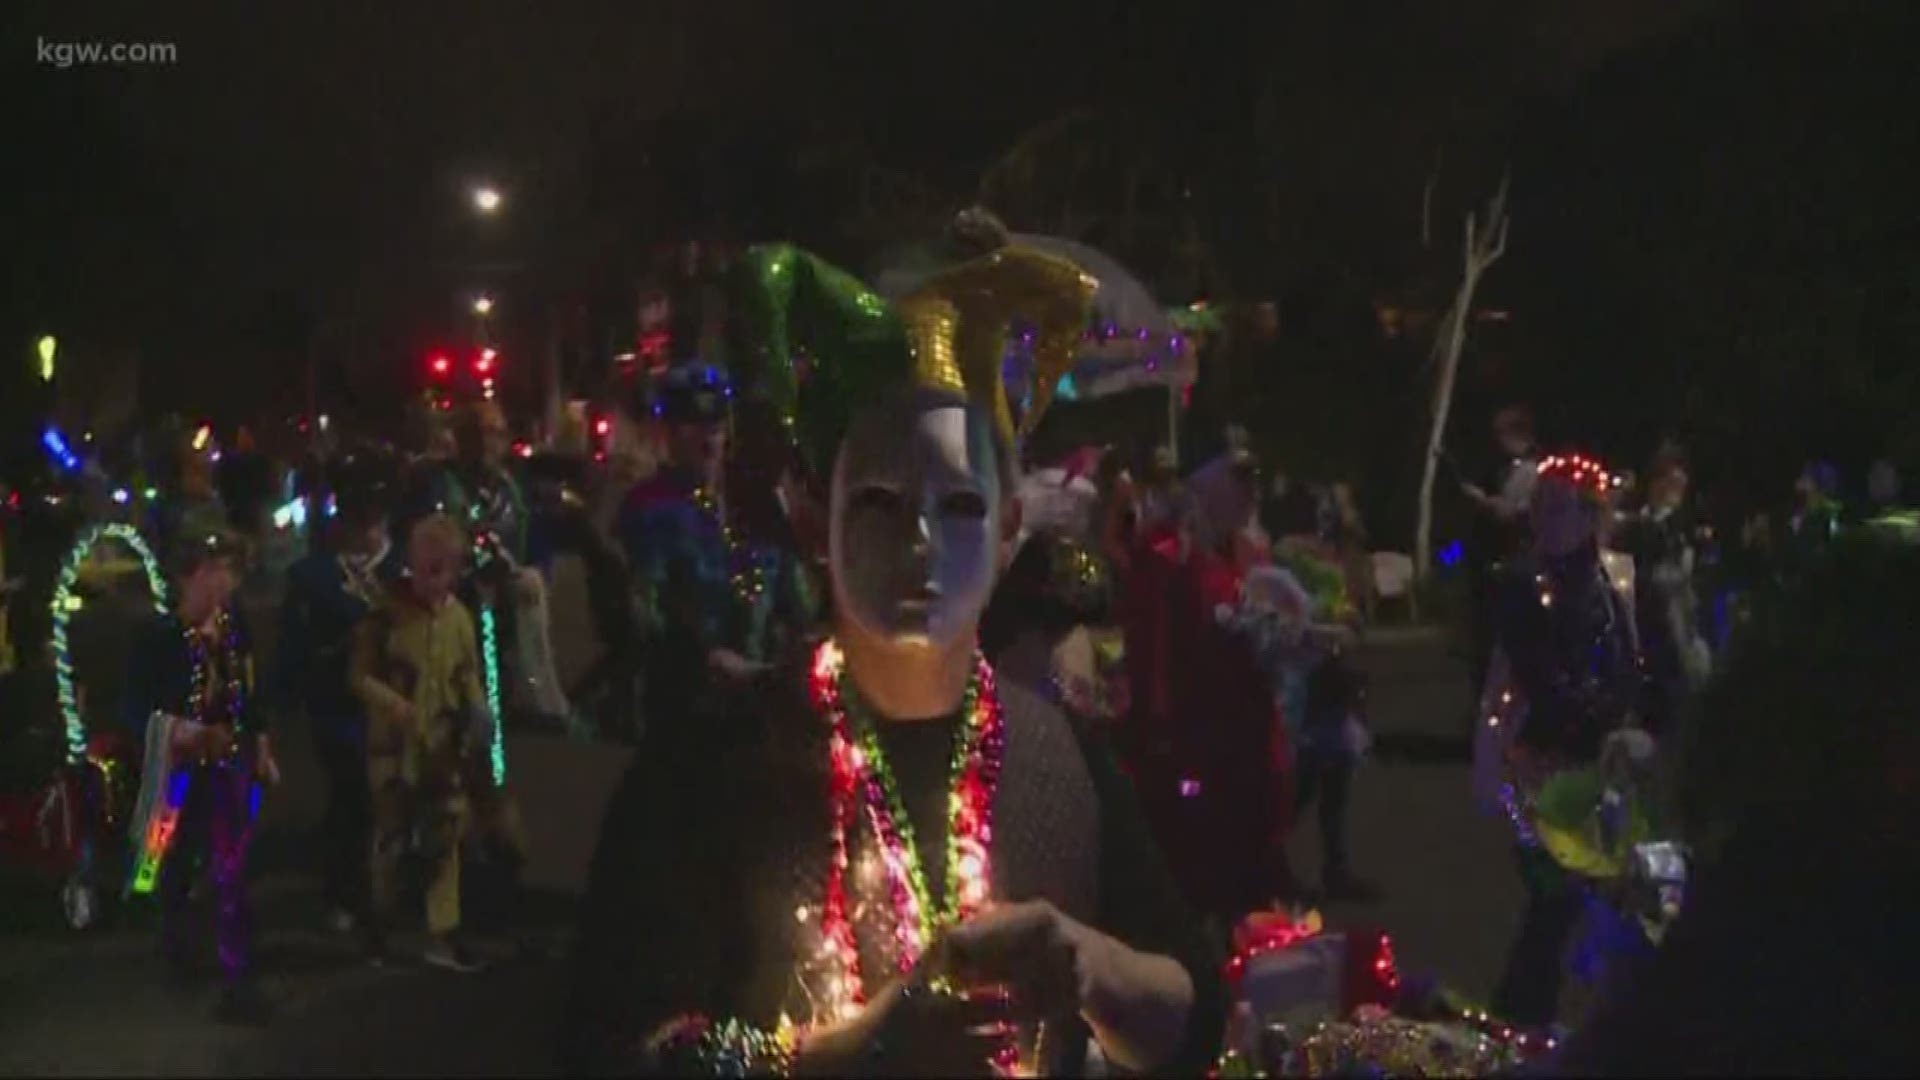 Mississippi Avenue becomes the scene for dancing, costumes and fun at the Portland Mardi Gras Parade!
http://www.portlandmardigras.com/portland-mardi-gras-parade/